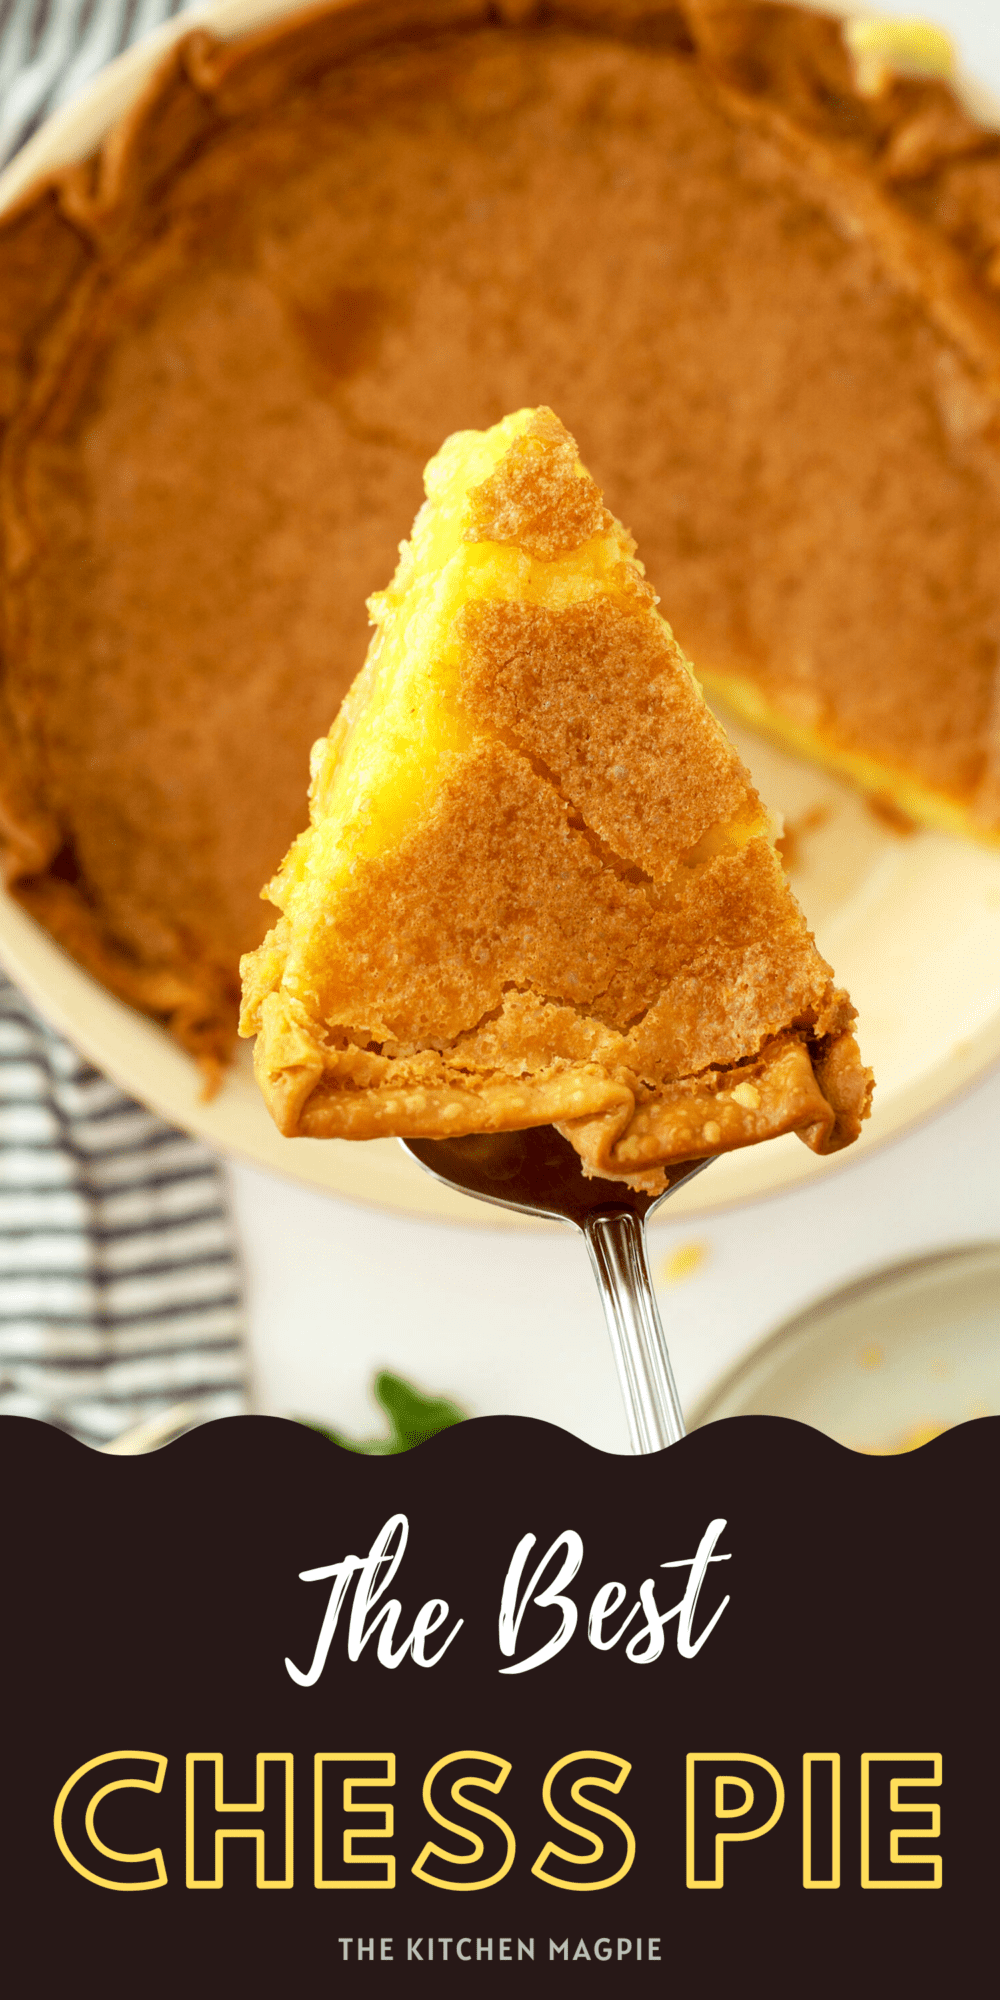 Chess pie is a decadent gooey, buttery custard-filled pie with a crispy top and pastry crust- the perfect easy Southern dessert!